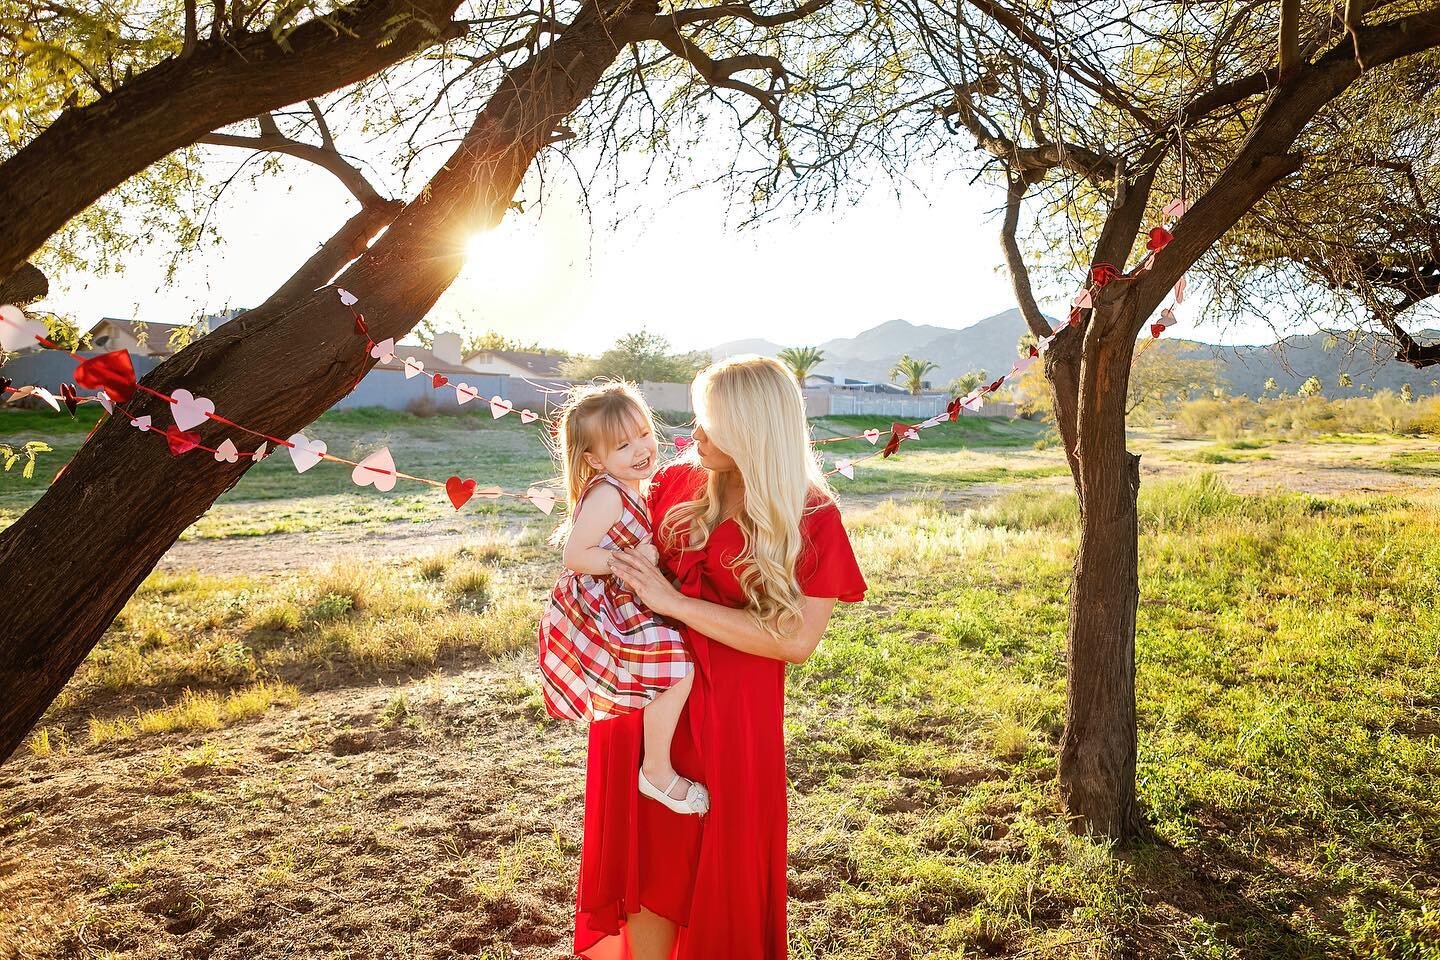 I have always wanted to do a Valentines themed photo shoot and a couple weeks ago I got the chance! Here&rsquo;s Vicki with her toddler amongst the valentines. ❤️❤️

Next up: wildflower photo shoots, Easter egg hunt photo shoots, and  Mother&rsquo;s 